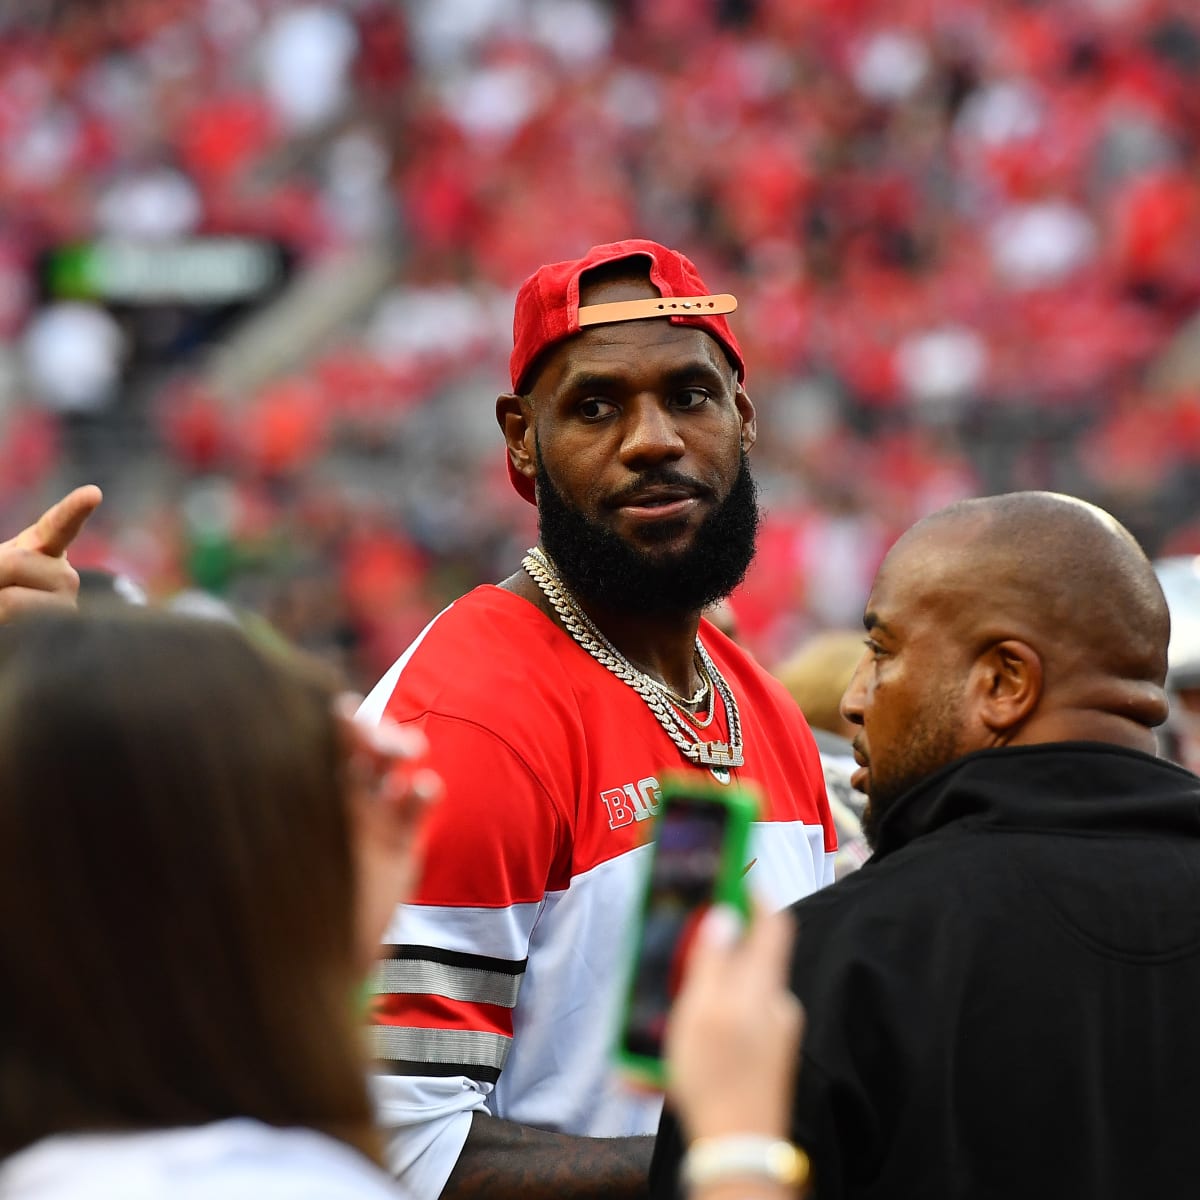 LeBron James gives shoutout to Ohio State's J.T. Tuimoloau during his  dominant performance against Penn State 